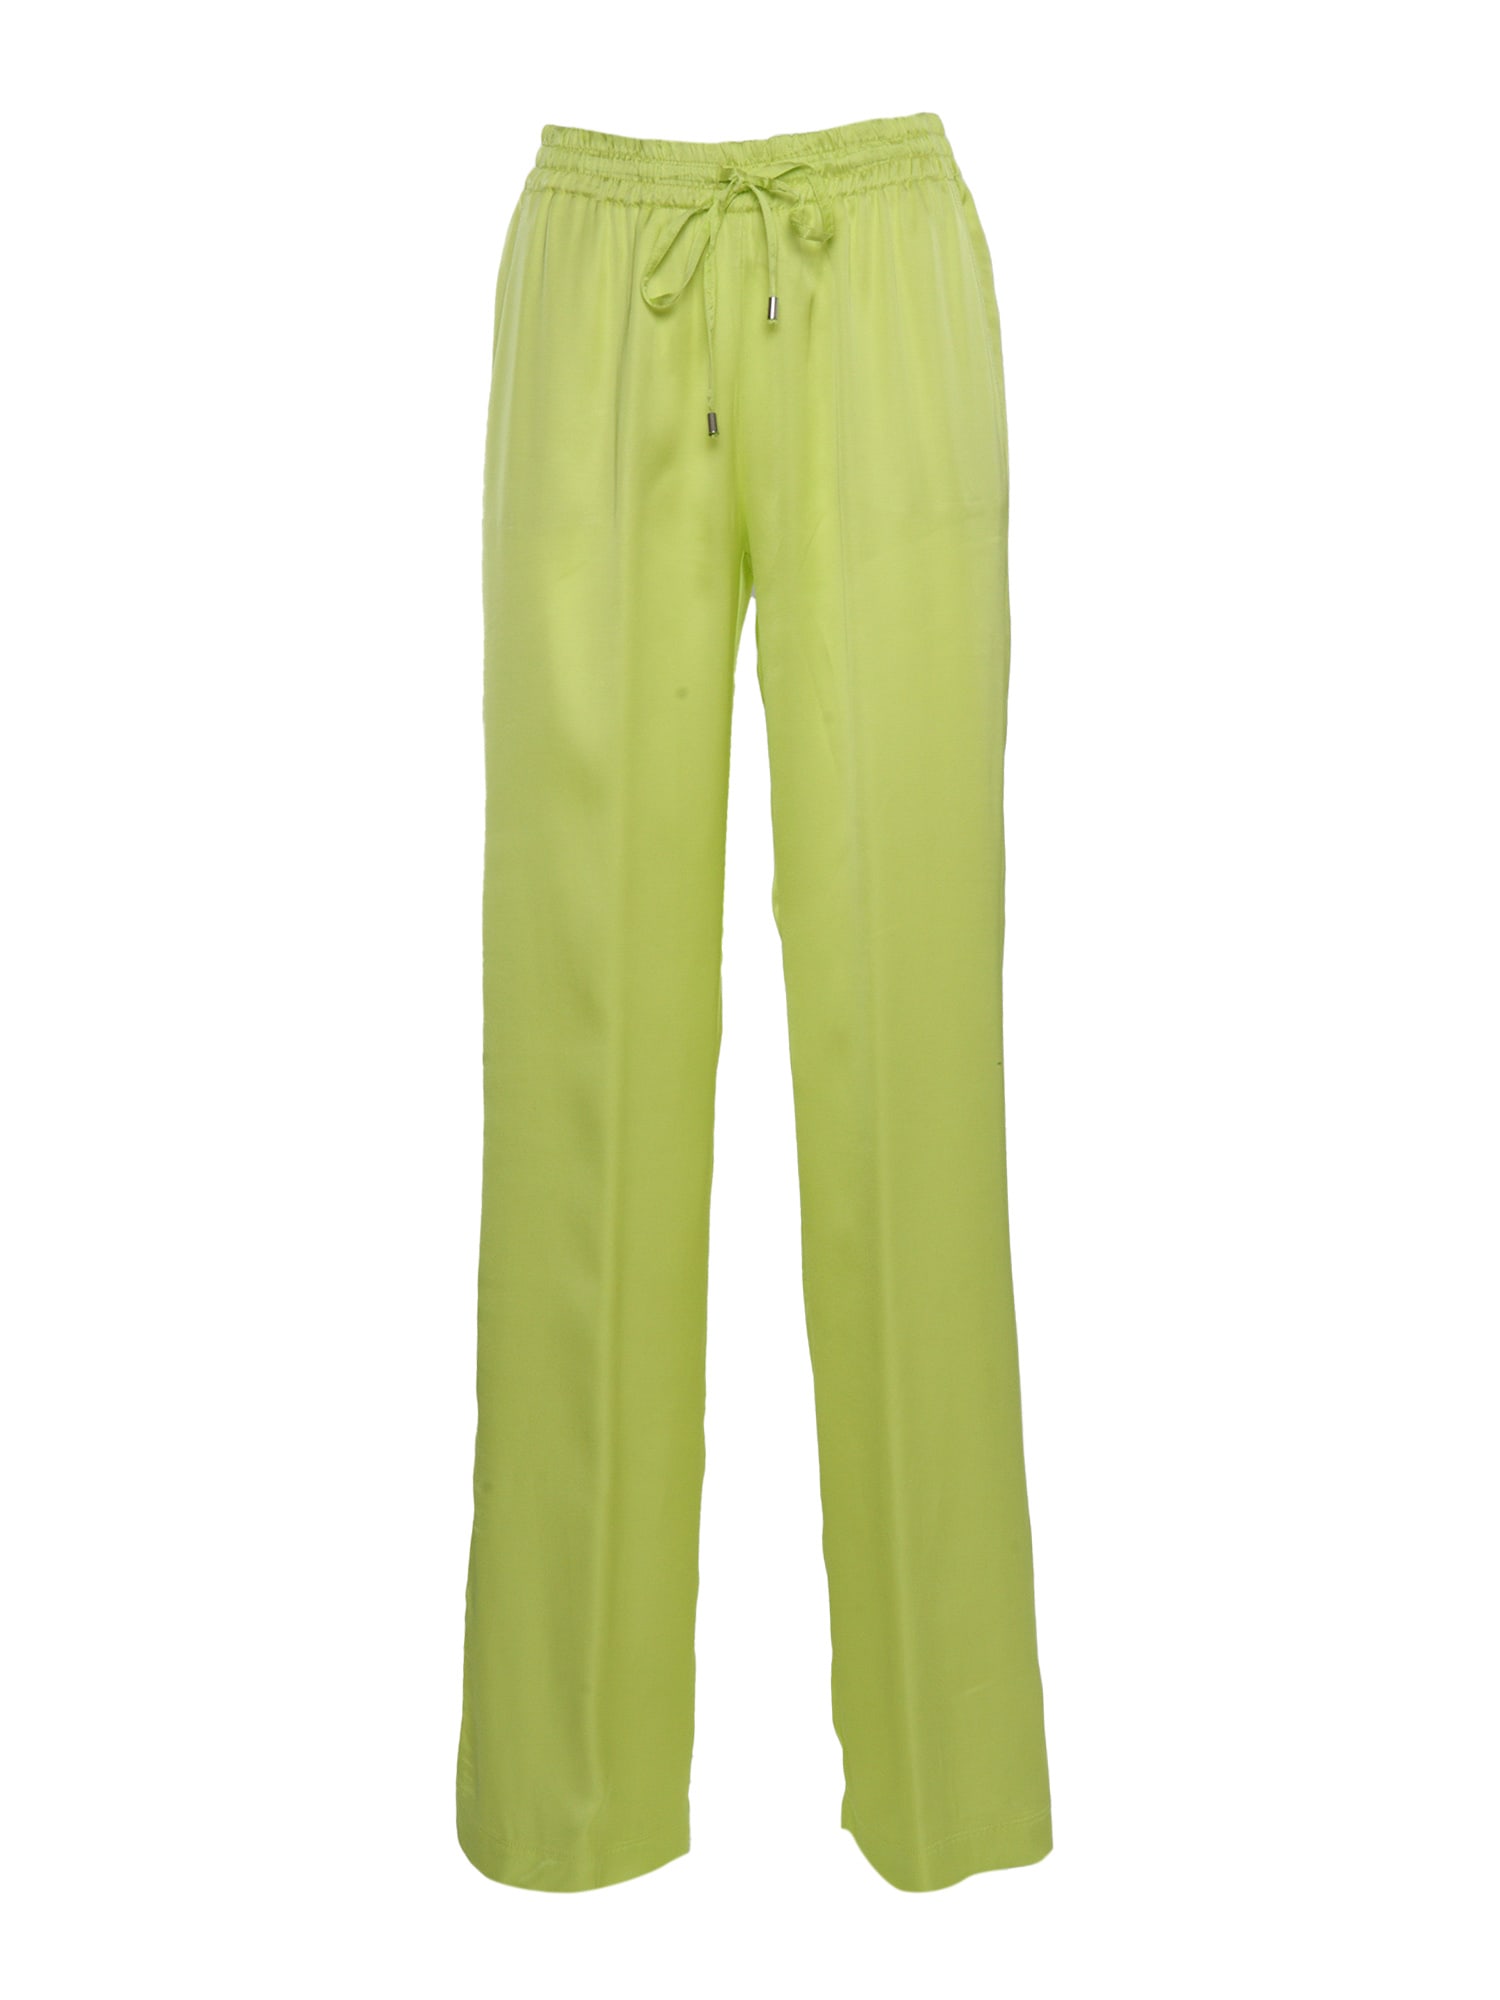 Ermanno Ermanno Scervino Pants With Drawstring